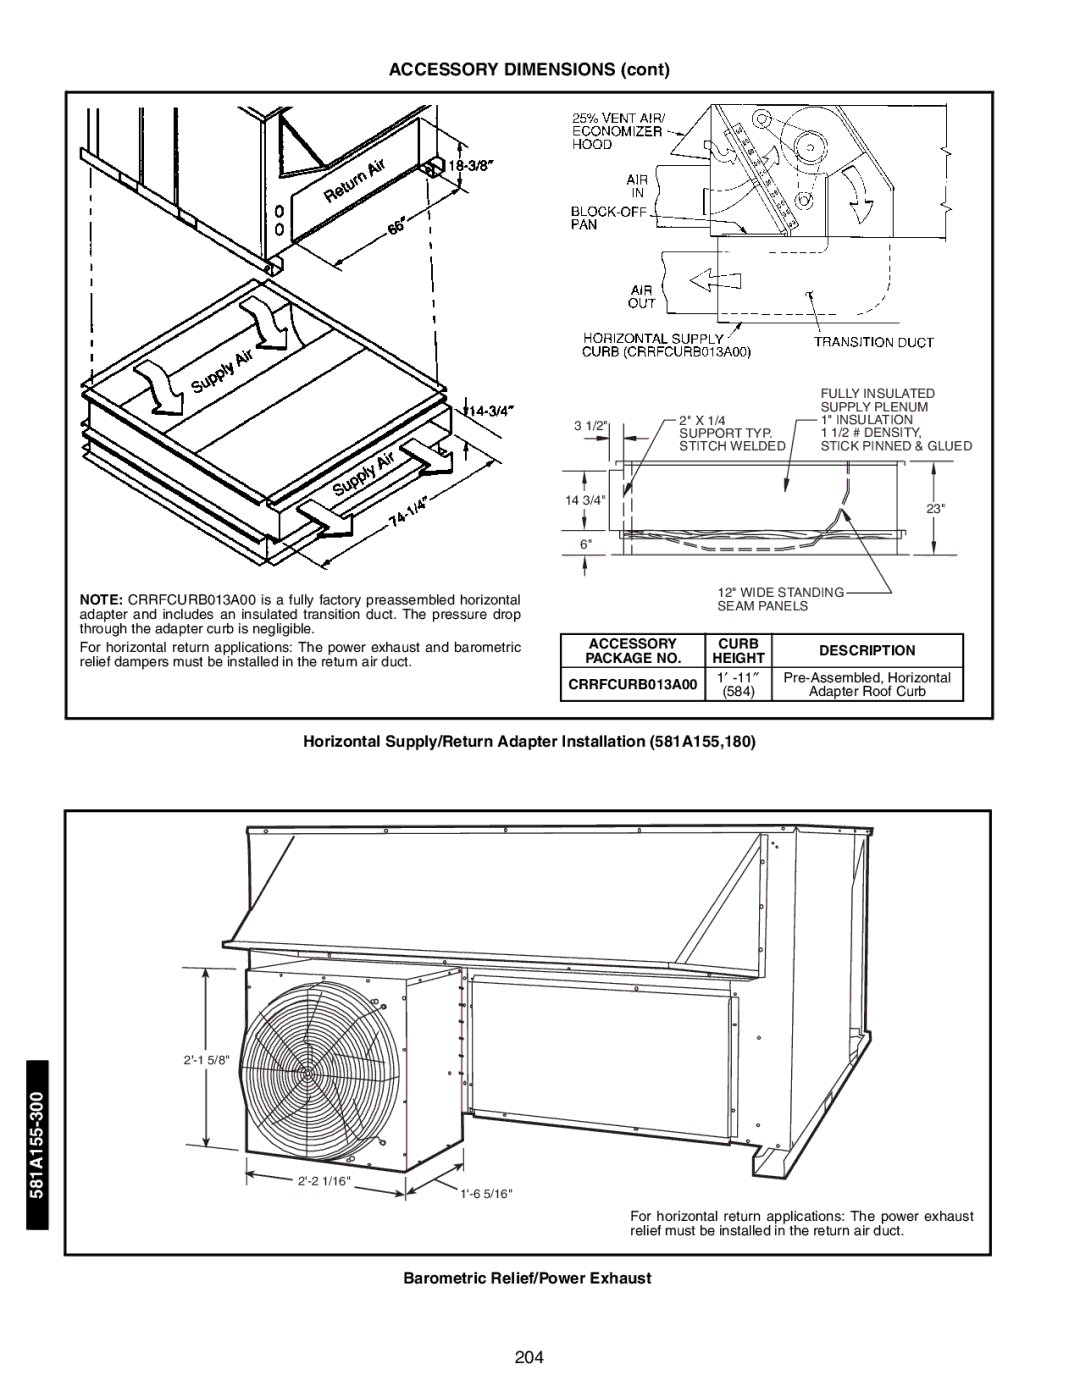 Bryant 581A/B manual Accessory Dimensions, Horizontal Supply/Return Adapter Installation 581A155,180 